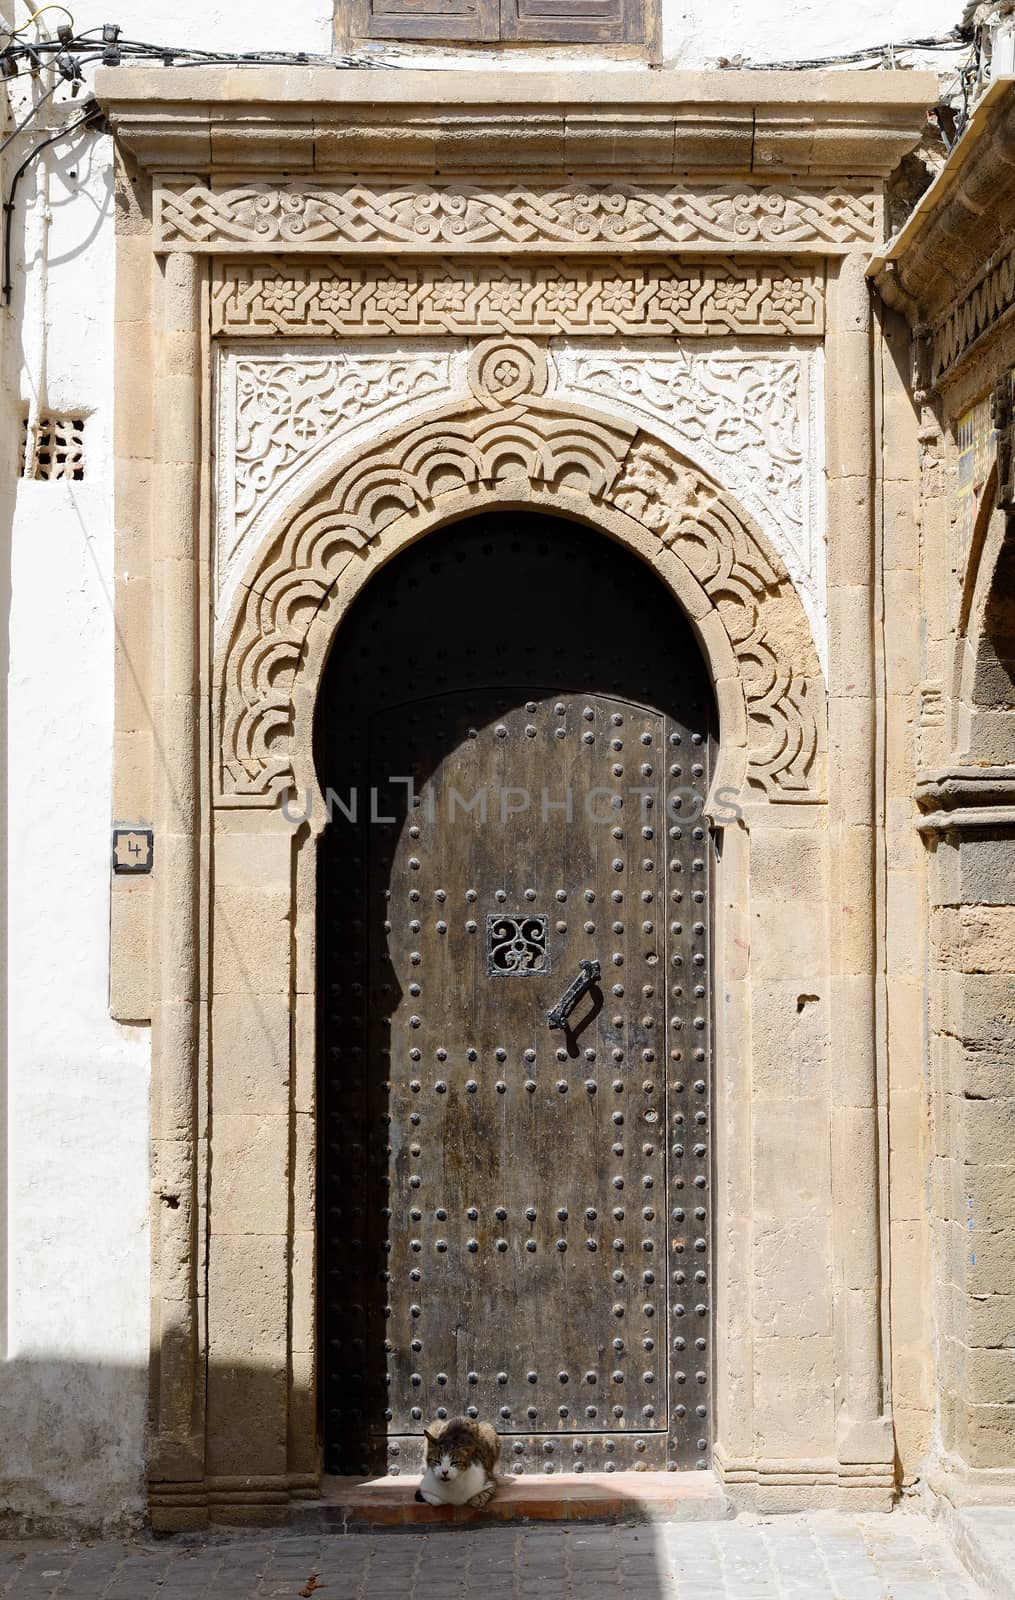 Beautiful detailed doorway in Morocco with cat.